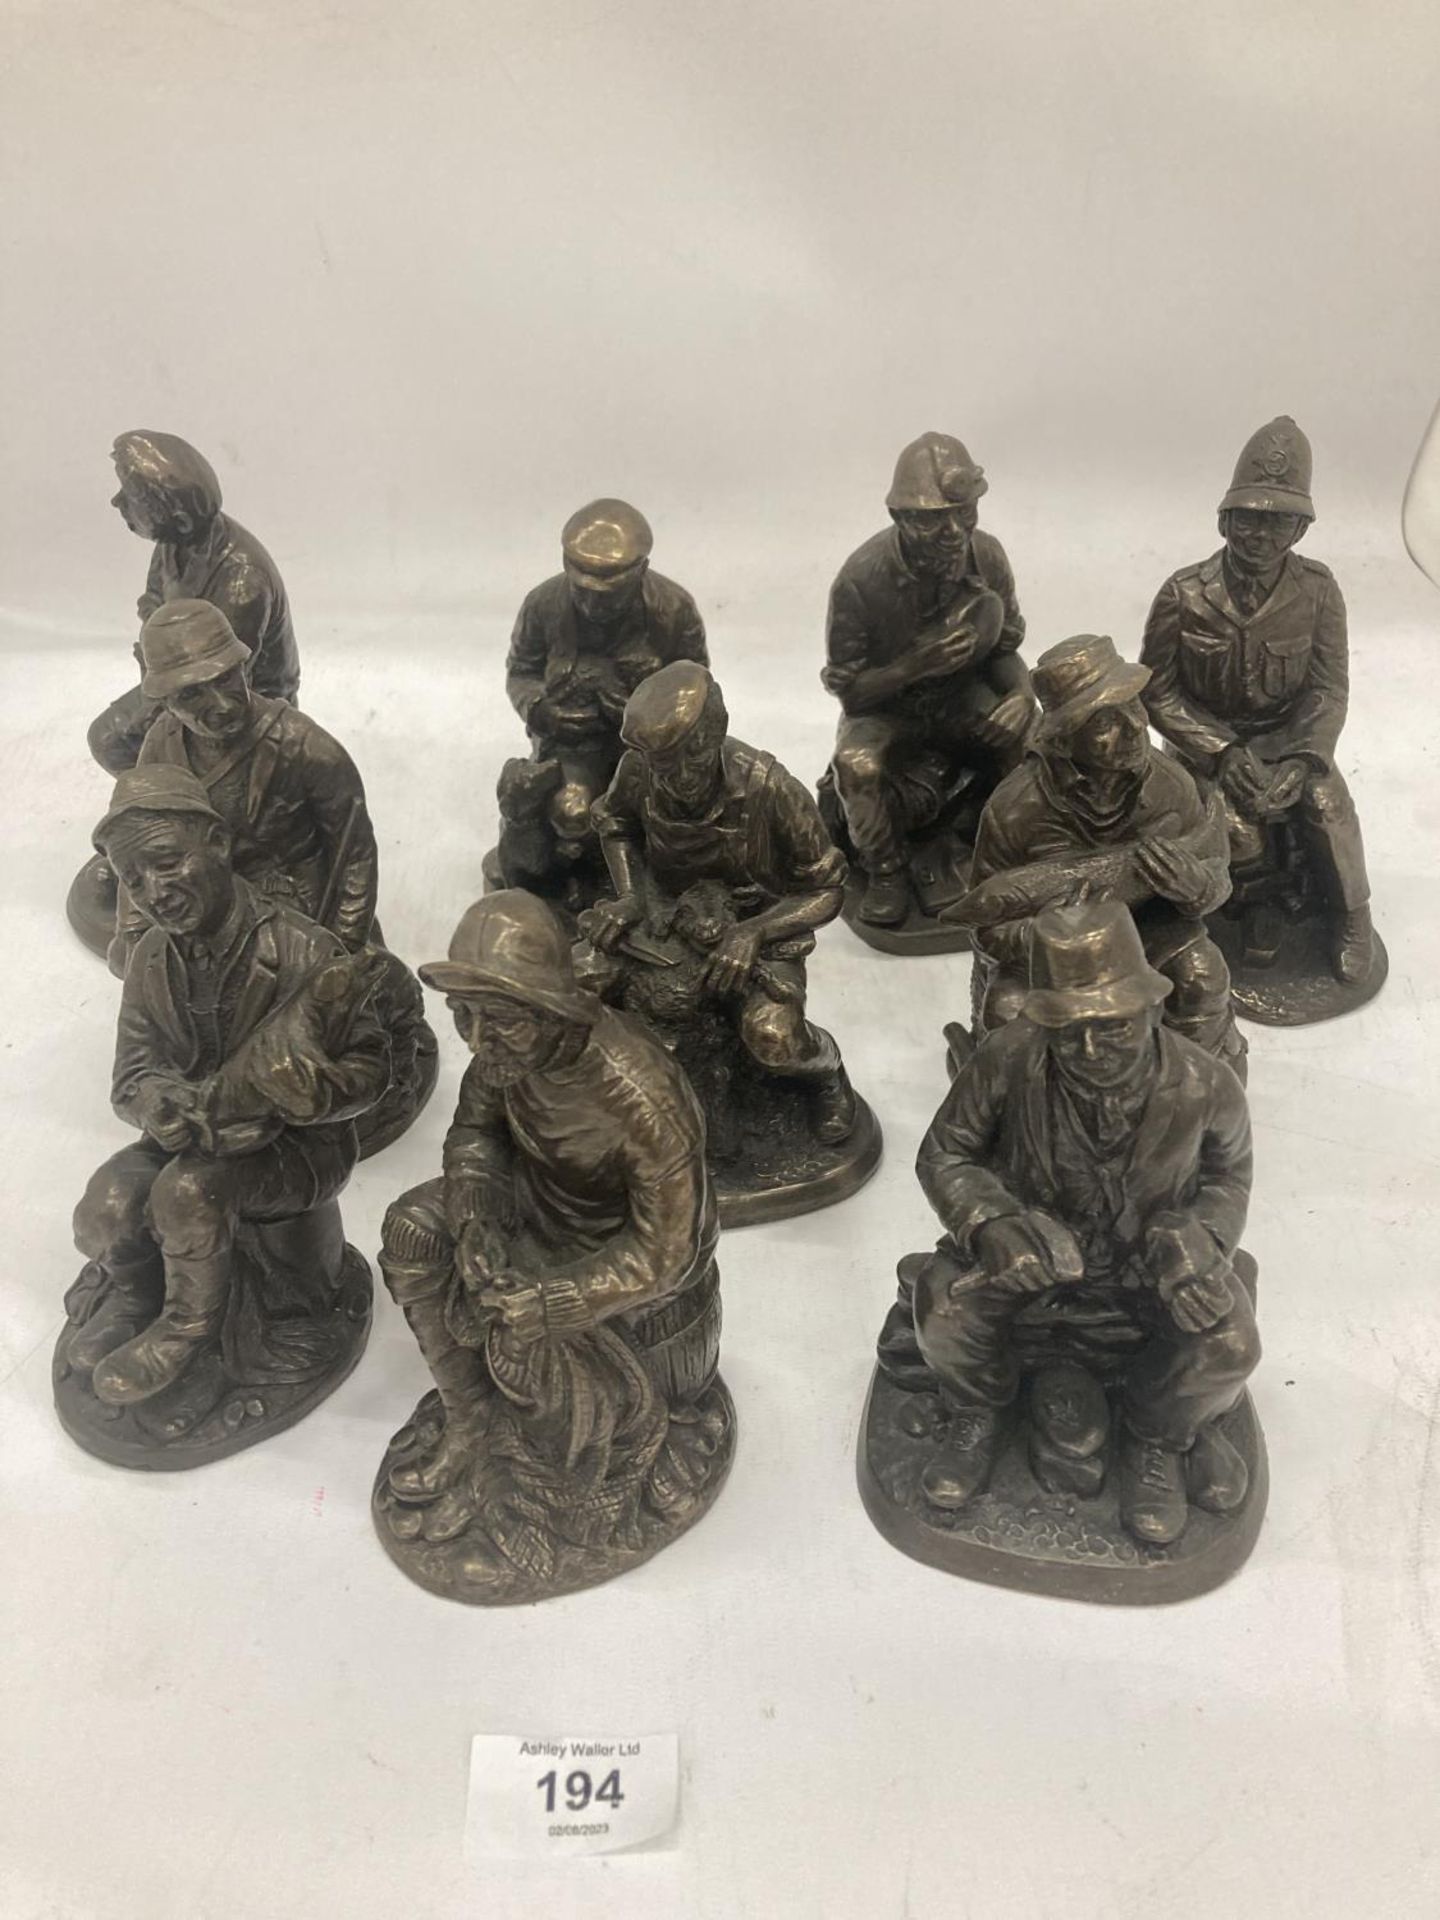 A COLLECTION OF VINTAGE STYLE FIGURES TO INCLUDE A BLACKSMITH, FISHERMAN, MINER, FARMER, ETC - 10 IN